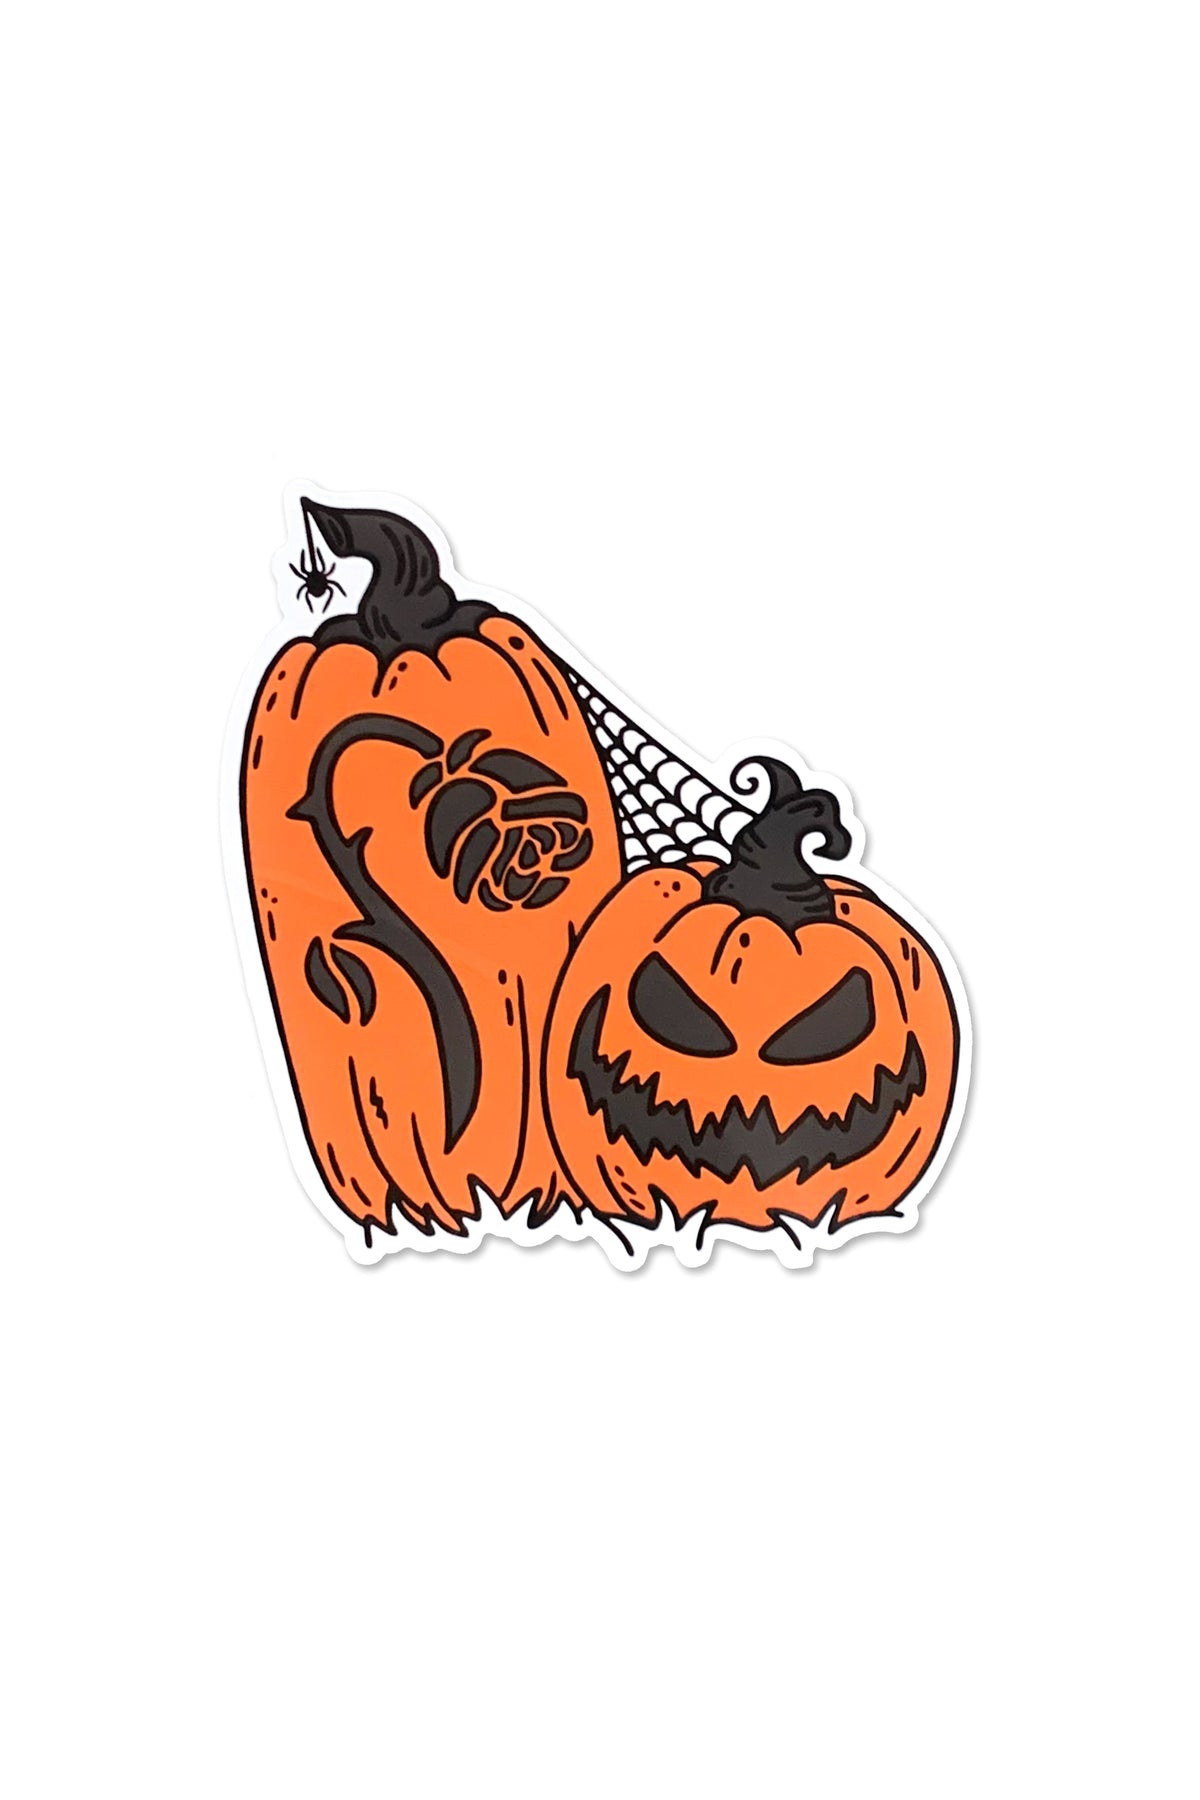 sticker with 2 carved jackolanterns, one with foxblood rose logo and one with pumpkin face